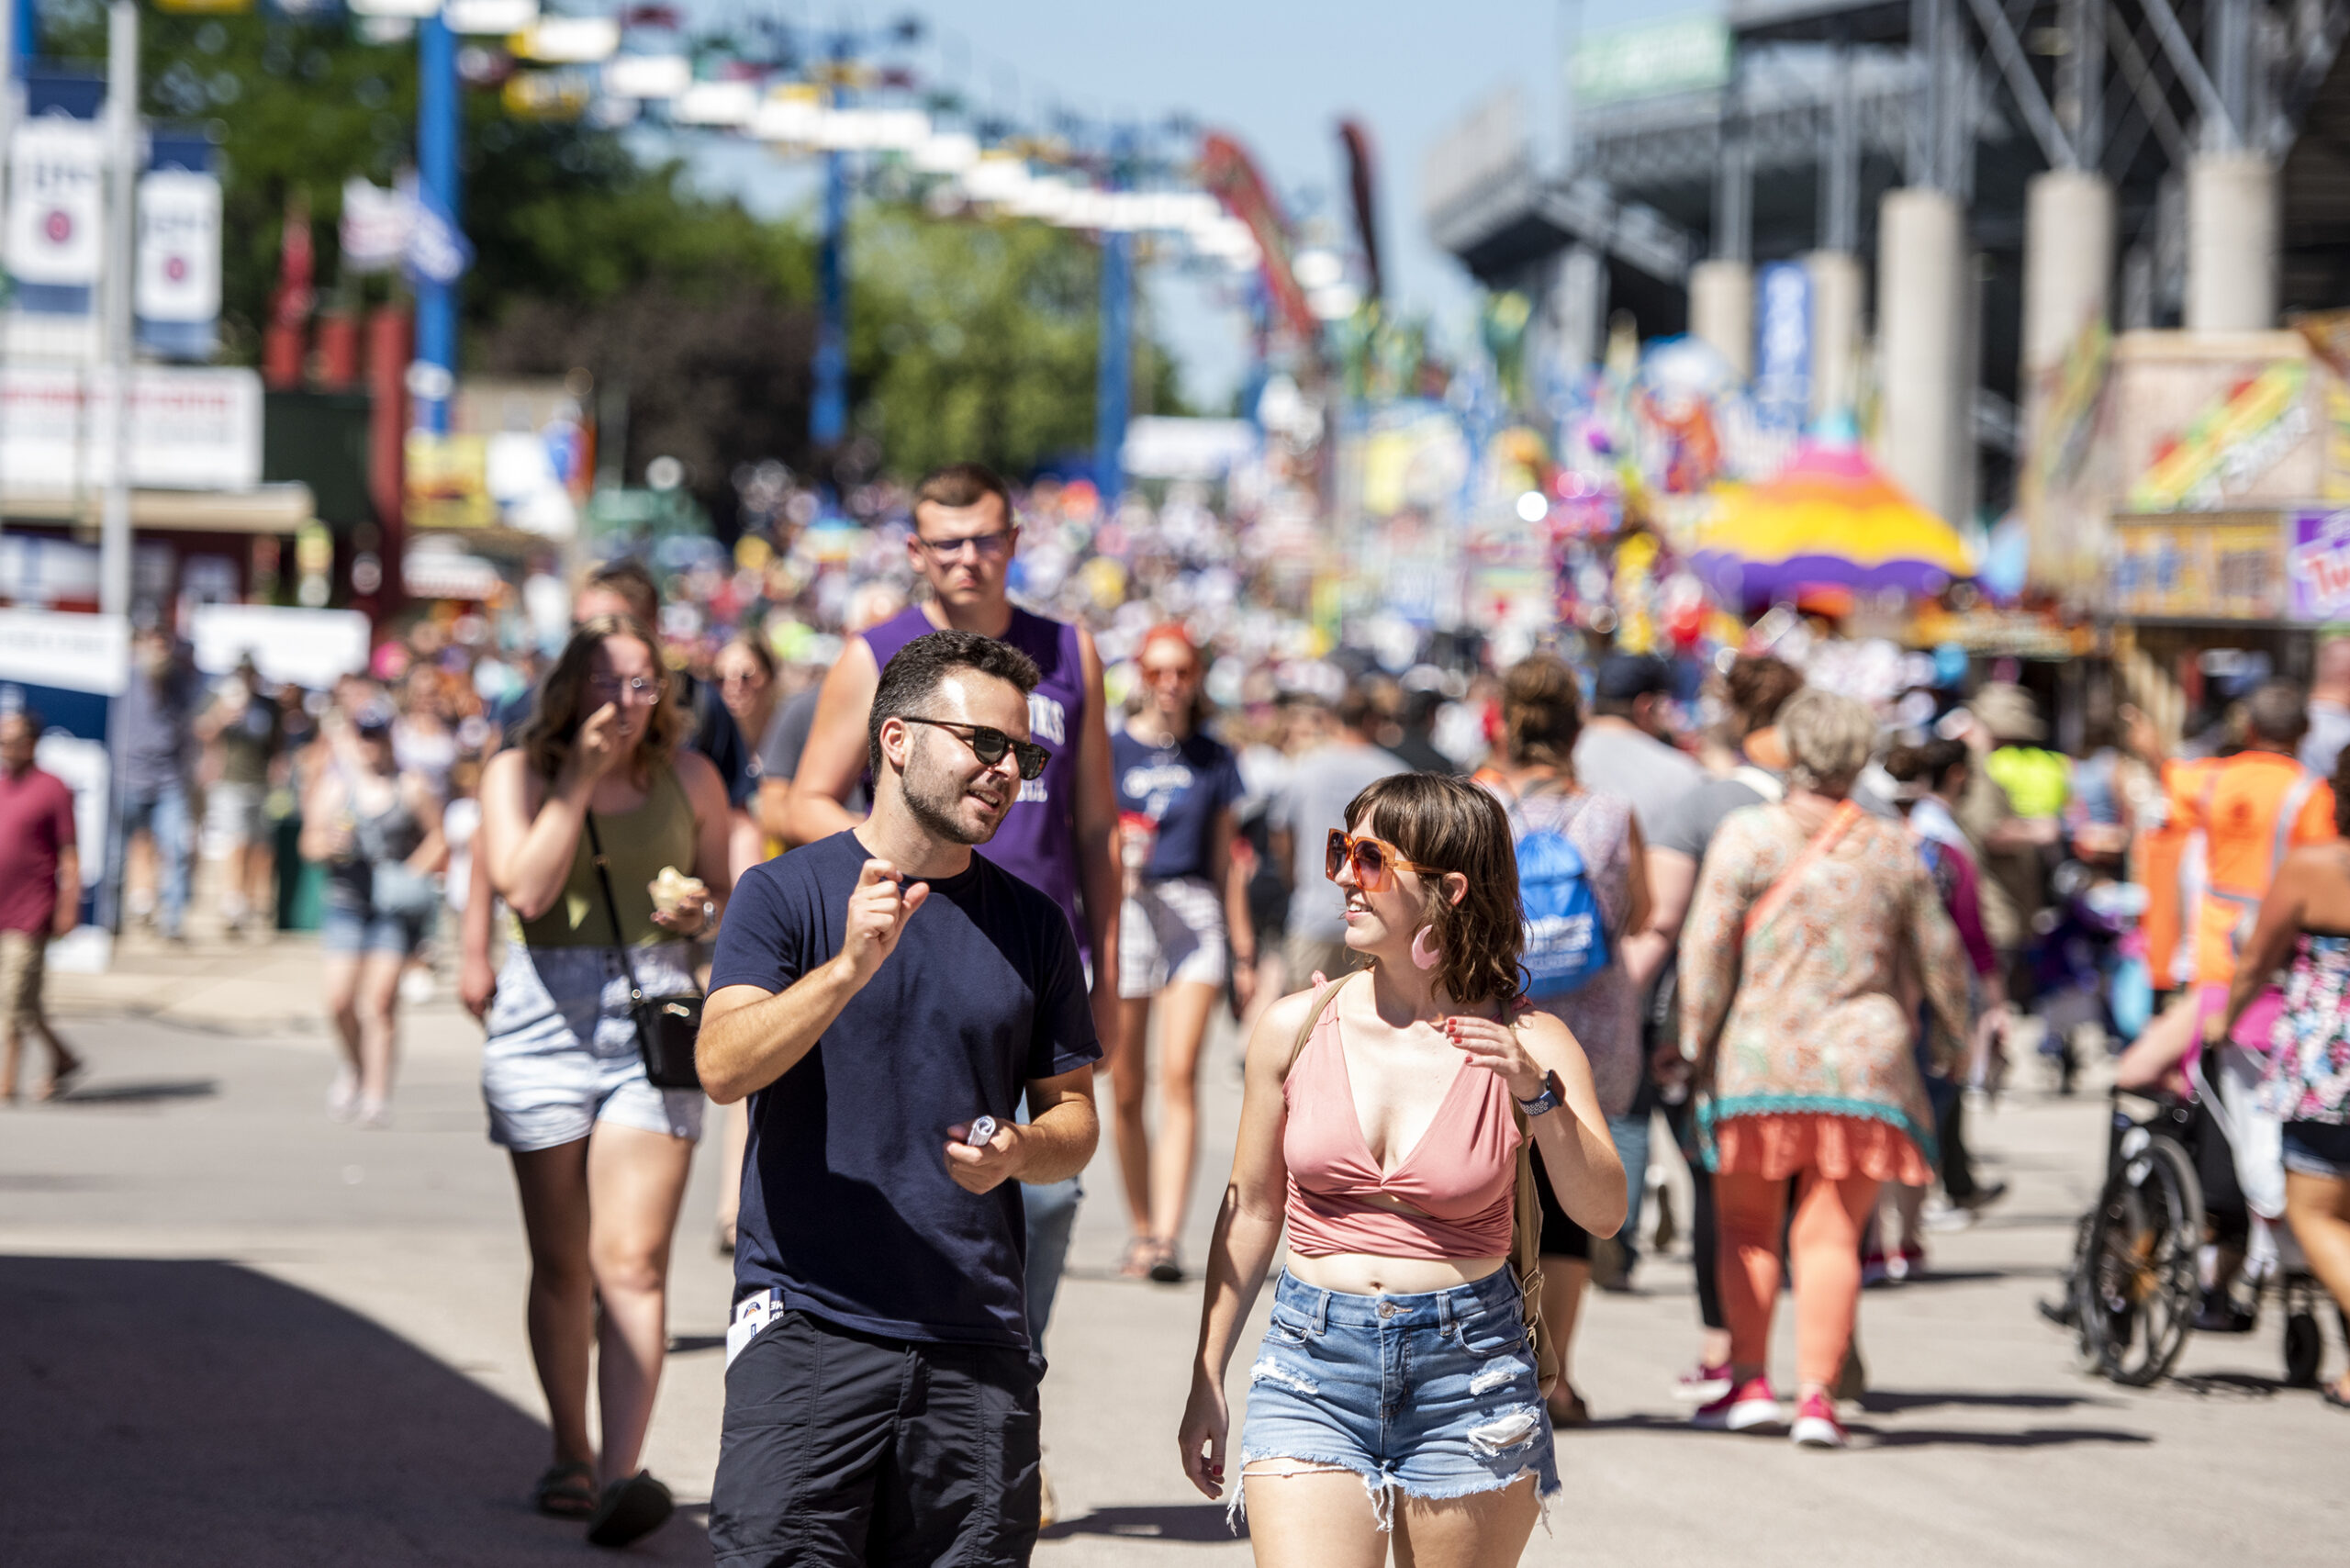 Two people walk together as a crowd walks behind them. Colorful fair booths are behind them.